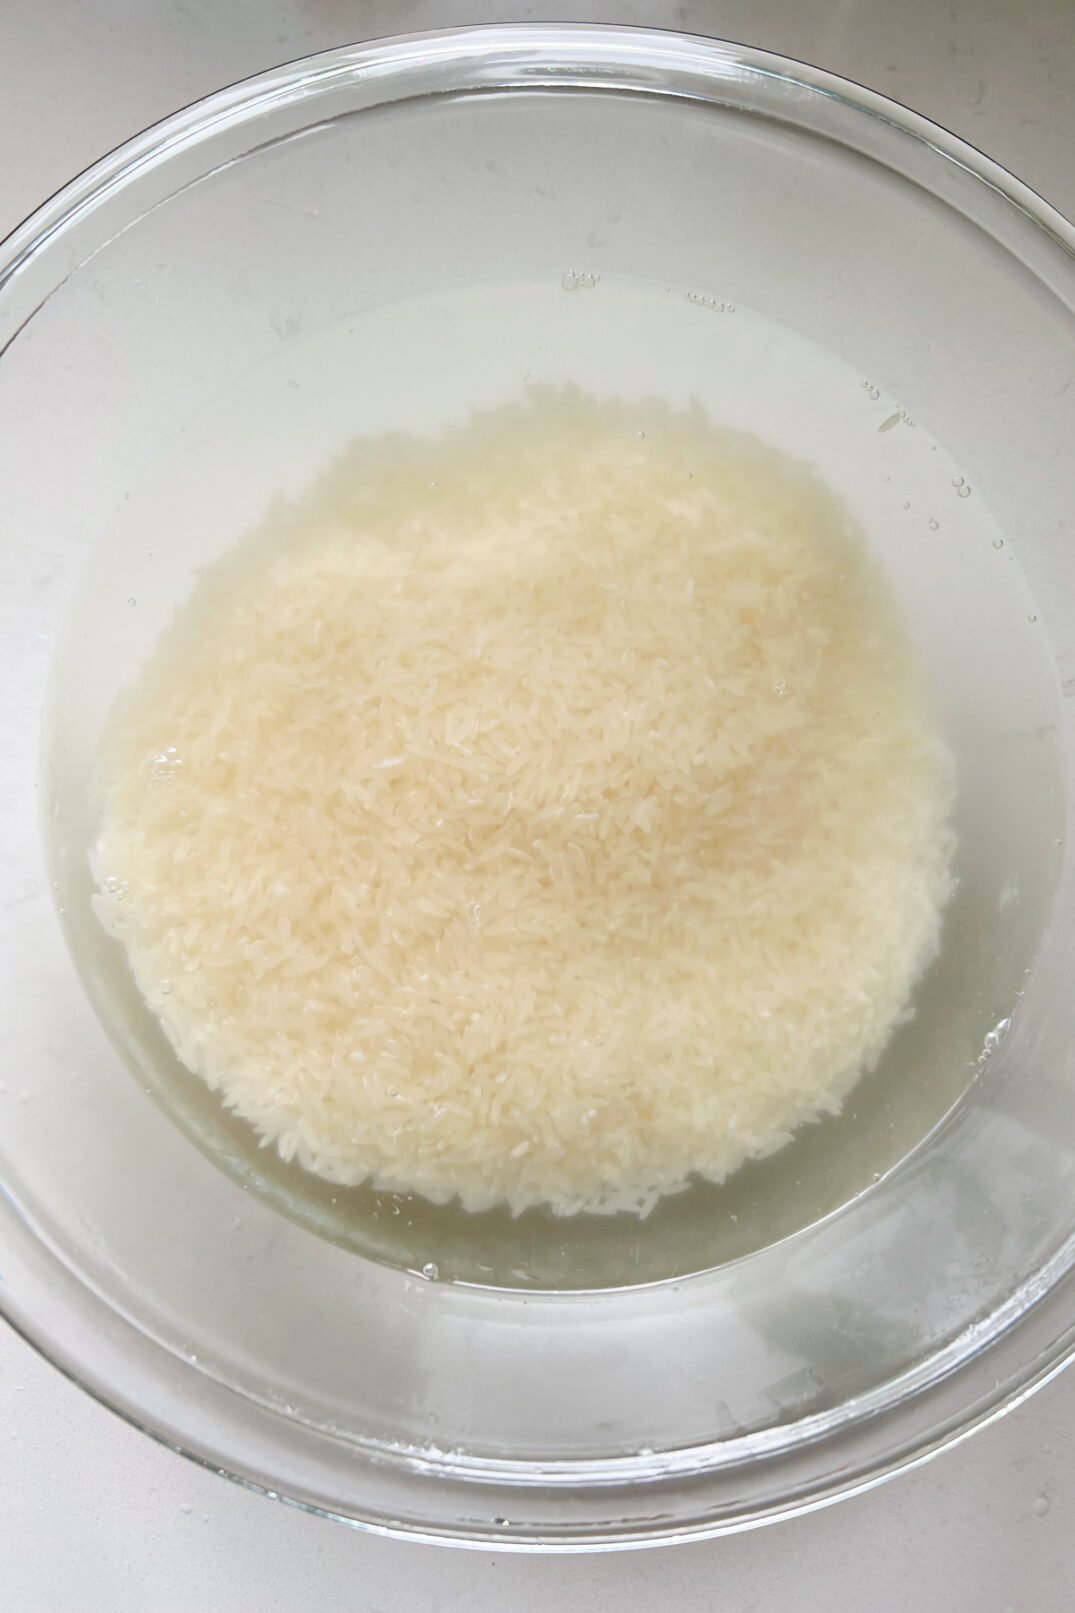 rice being rinsed in a glass bowl with clear water. 